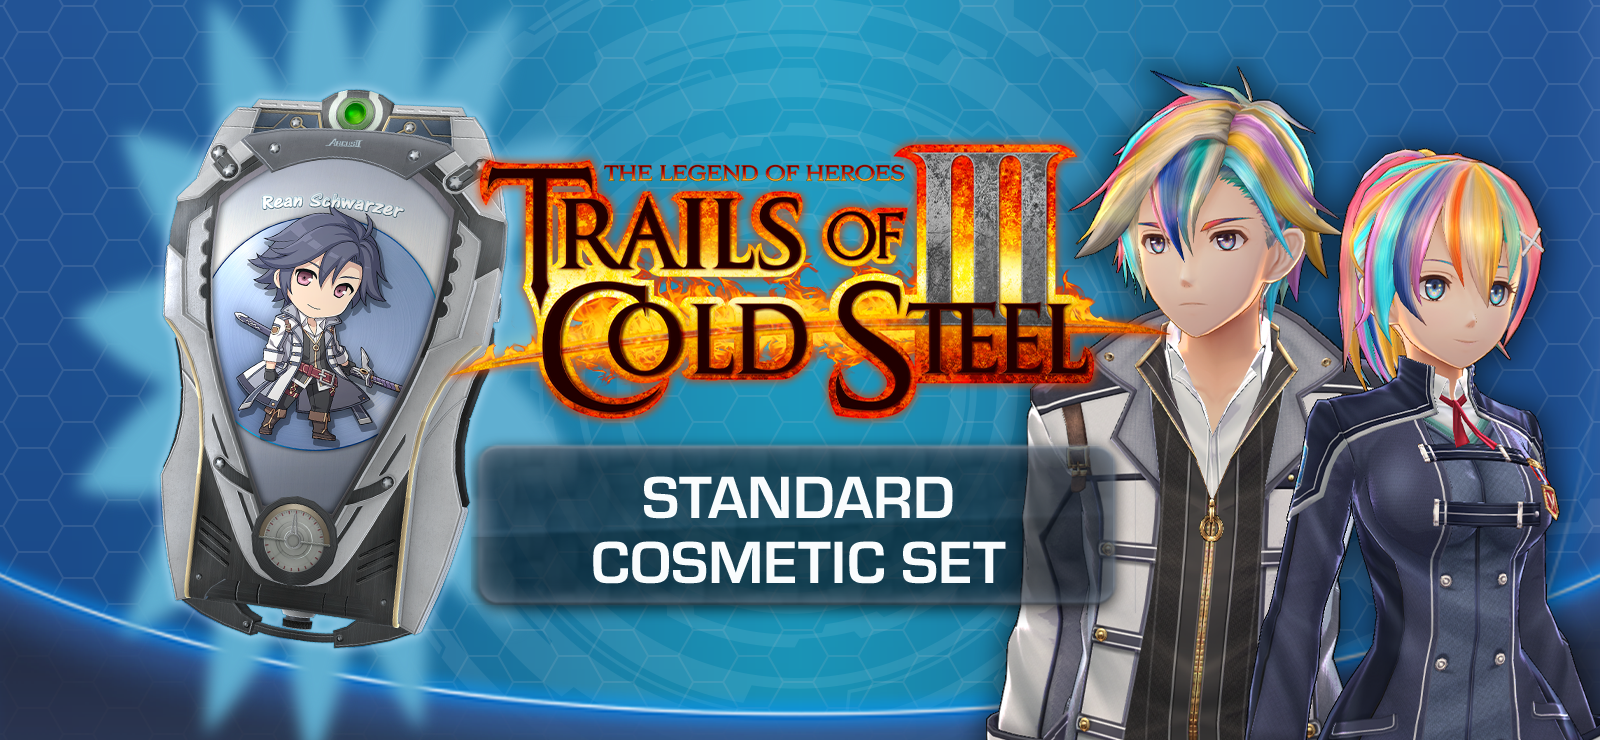 The Legend Of Heroes: Trails Of Cold Steel III - Standard Cosmetic Set